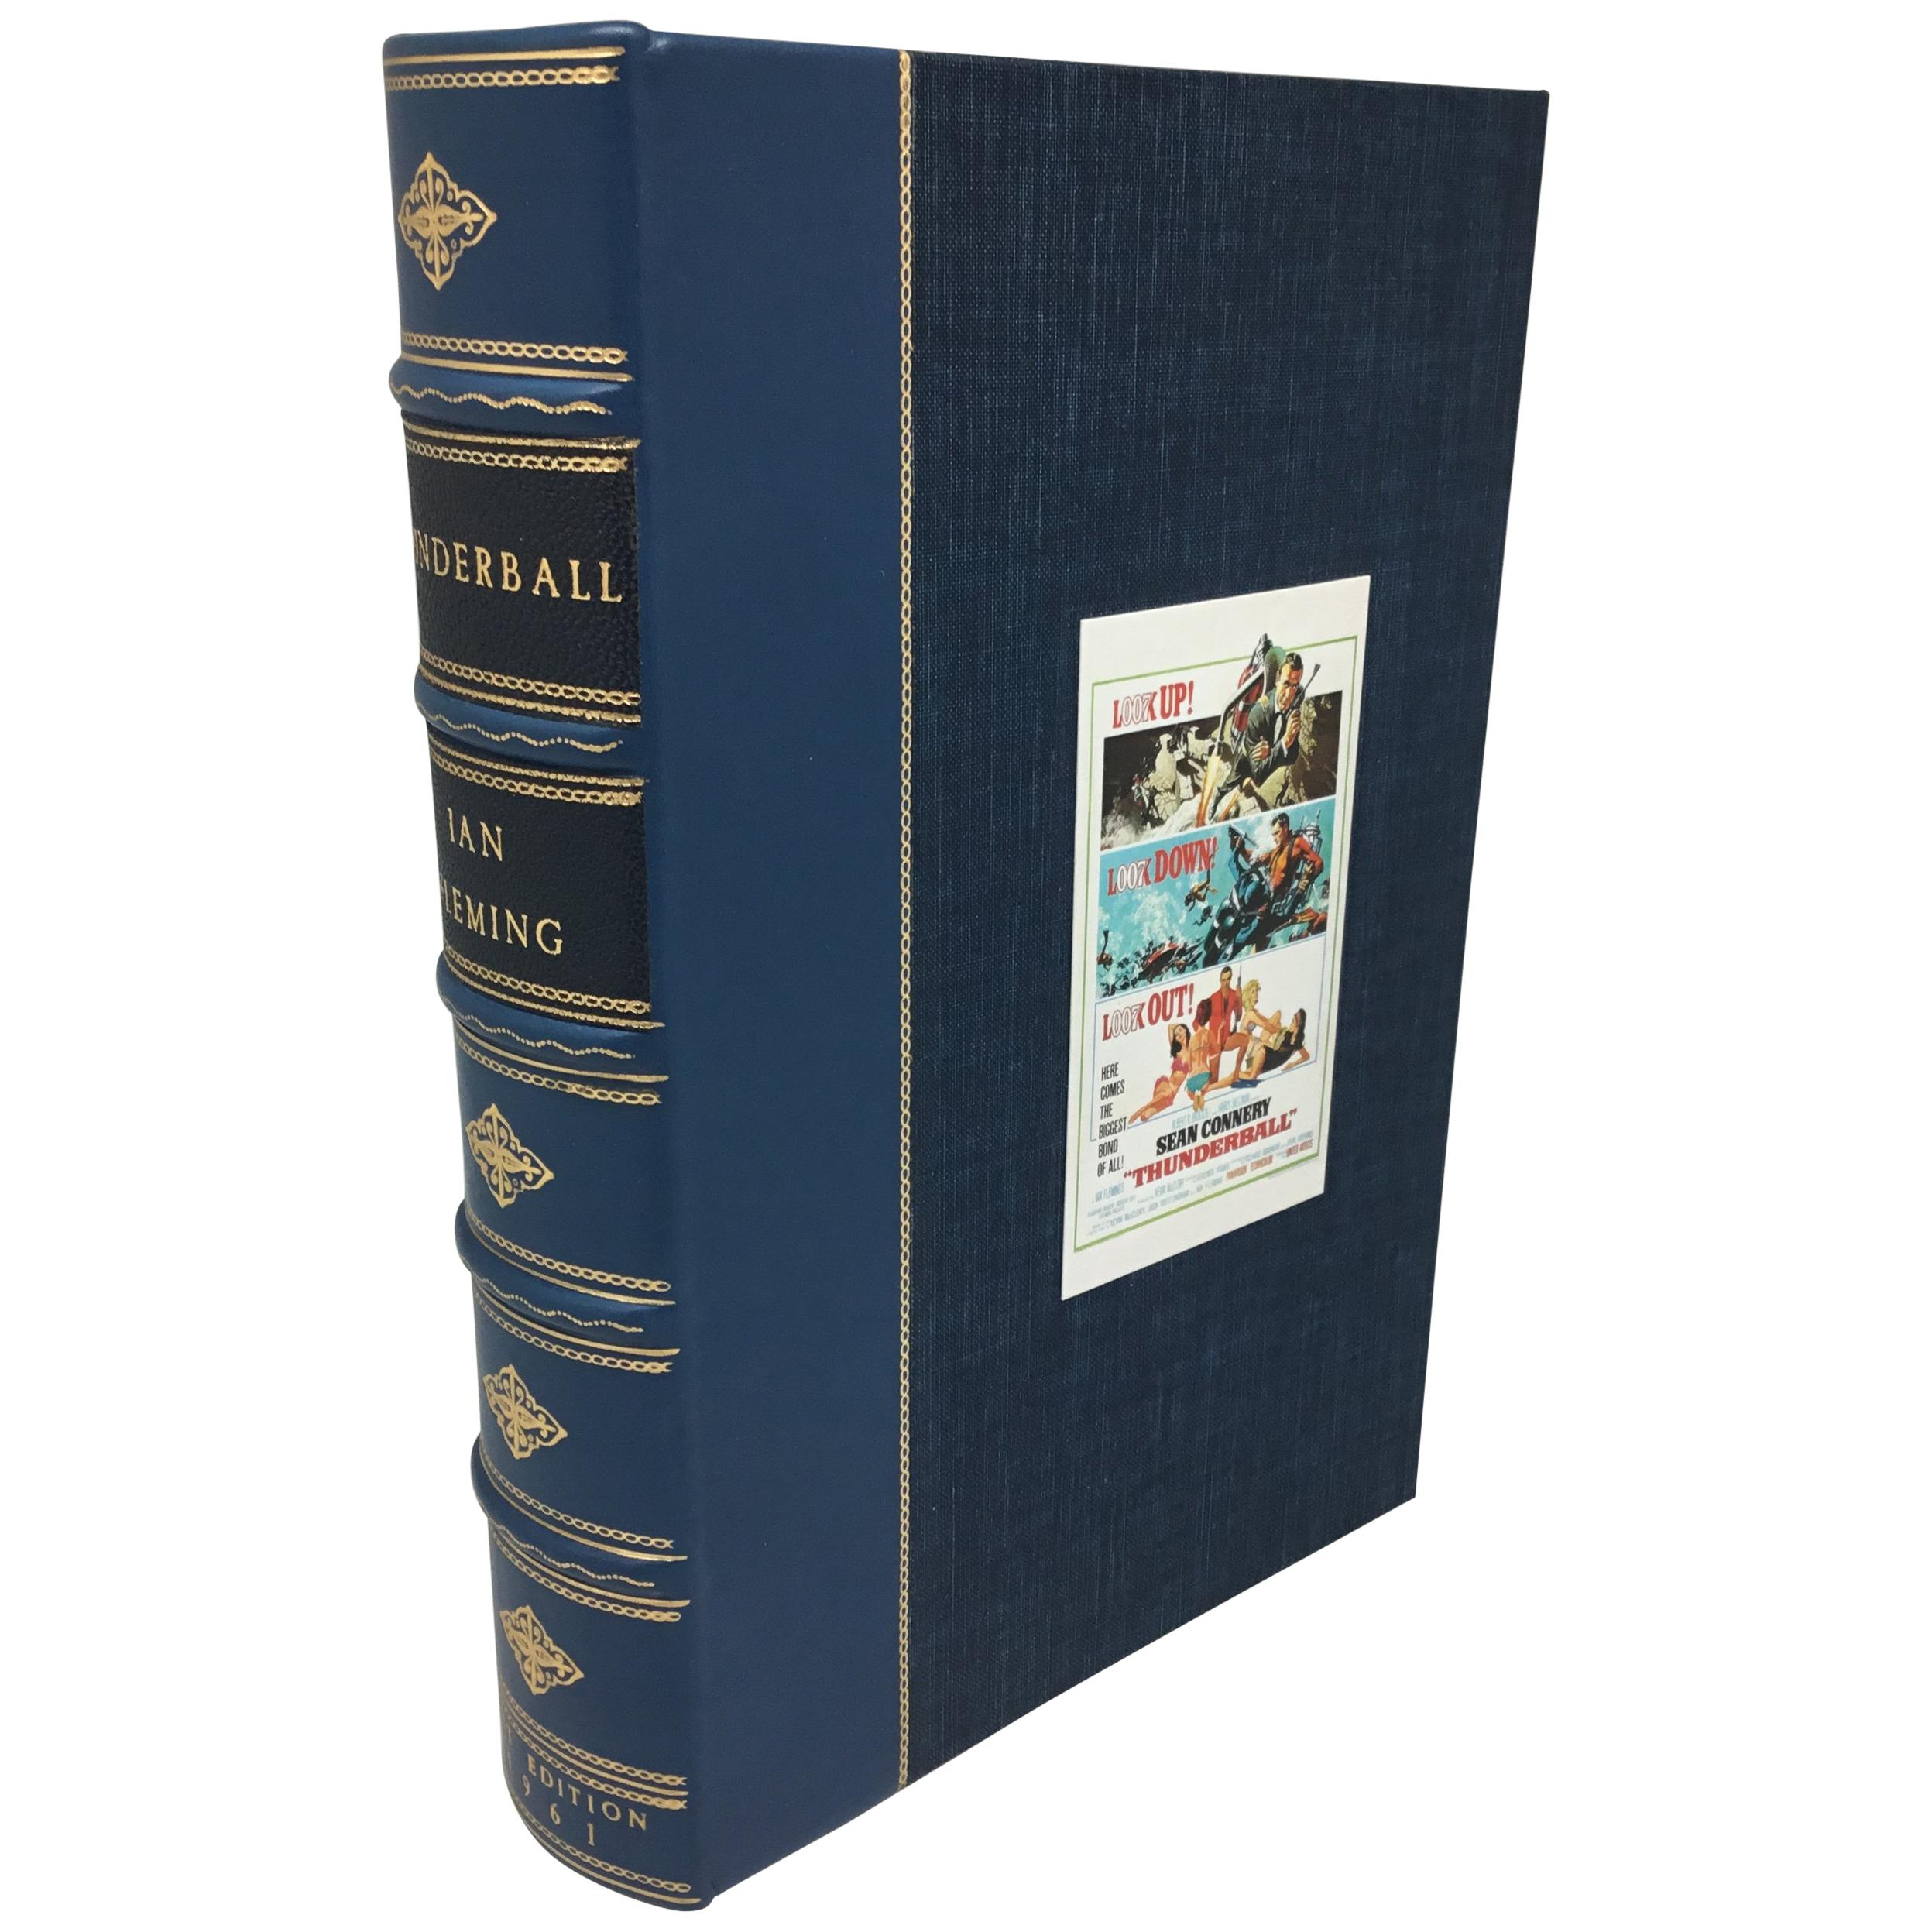 Fleming, Ian. Thunderball. London: Jonathan Cape, (1961). First edition, first printing. Octavo, in full, custom blue leather binding with decorative gilt spine, blind embossed skeleton cover, and matching quarter leather clamshell case. 

This is a